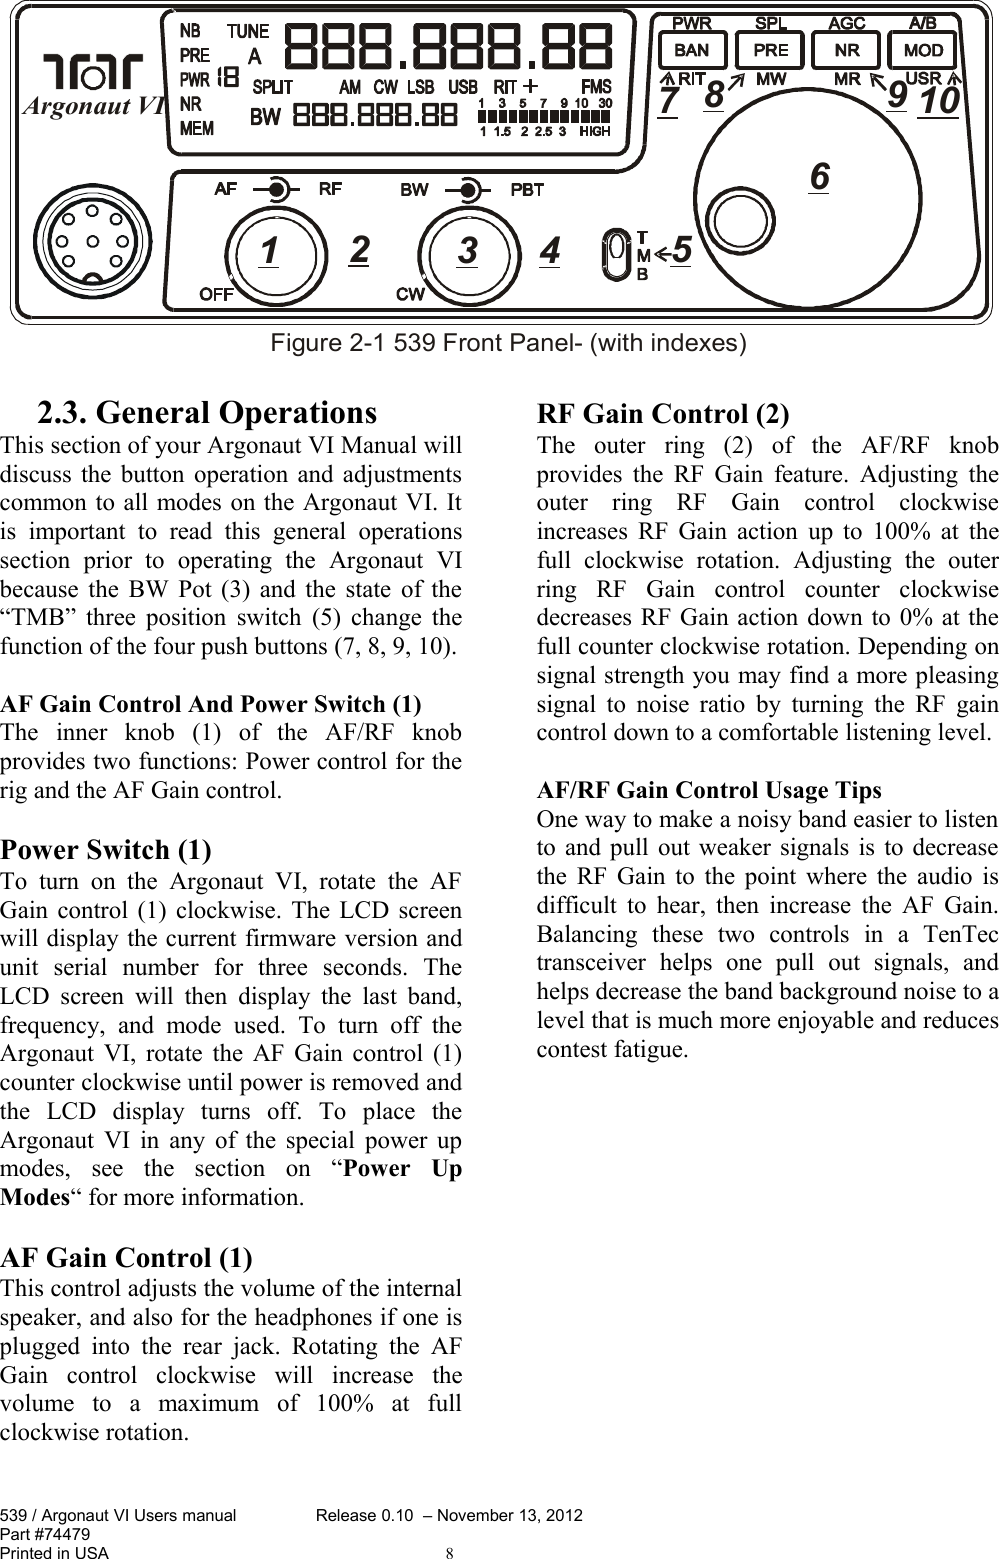 2.3. General OperationsThis section of your Argonaut VI Manual will discuss the button operation and adjustments common to all modes on the Argonaut VI. It is   important   to   read   this   general   operations section   prior   to   operating   the   Argonaut   VI because the BW Pot (3) and the state of the “TMB” three position switch (5) change the function of the four push buttons (7, 8, 9, 10).AF Gain Control And Power Switch (1)The   inner   knob   (1)   of   the   AF/RF   knob provides two functions: Power control for the rig and the AF Gain control.Power Switch (1)To turn  on   the  Argonaut VI,  rotate  the AF Gain control (1) clockwise. The LCD screen will display the current firmware version and unit   serial   number   for   three   seconds.   The LCD screen will then display the last band, frequency,   and   mode   used.   To   turn   off  the Argonaut VI, rotate the AF Gain control (1) counter clockwise until power is removed and the   LCD   display   turns   off.   To   place   the Argonaut VI in any of the special power up modes,   see   the   section   on   “Power   Up Modes“ for more information. AF Gain Control (1)This control adjusts the volume of the internal speaker, and also for the headphones if one is plugged  into   the rear jack.  Rotating the AF Gain   control   clockwise   will   increase   the volume   to   a   maximum   of   100%   at   full clockwise rotation. RF Gain Control (2)The   outer   ring   (2)   of   the   AF/RF   knob provides the RF Gain feature. Adjusting the outer   ring   RF   Gain   control   clockwise increases RF Gain action up to 100% at the full   clockwise   rotation.   Adjusting   the   outer ring   RF   Gain   control   counter   clockwise decreases RF Gain action down to 0% at the full counter clockwise rotation. Depending on signal strength you may find a more pleasing signal to noise ratio by turning the RF gain control down to a comfortable listening level.AF/RF Gain Control Usage TipsOne way to make a noisy band easier to listen to and pull out weaker signals is to decrease the RF Gain to the point where the audio is difficult to hear, then increase the AF Gain. Balancing   these   two   controls   in   a   TenTec transceiver   helps   one   pull   out   signals,   and helps decrease the band background noise to a level that is much more enjoyable and reduces contest fatigue.539 / Argonaut VI Users manual Release 0.10  – November 13, 2012Part #74479Printed in USA 8123 4 5678109Figure 2-1 539 Front Panel- (with indexes)Argonaut VI